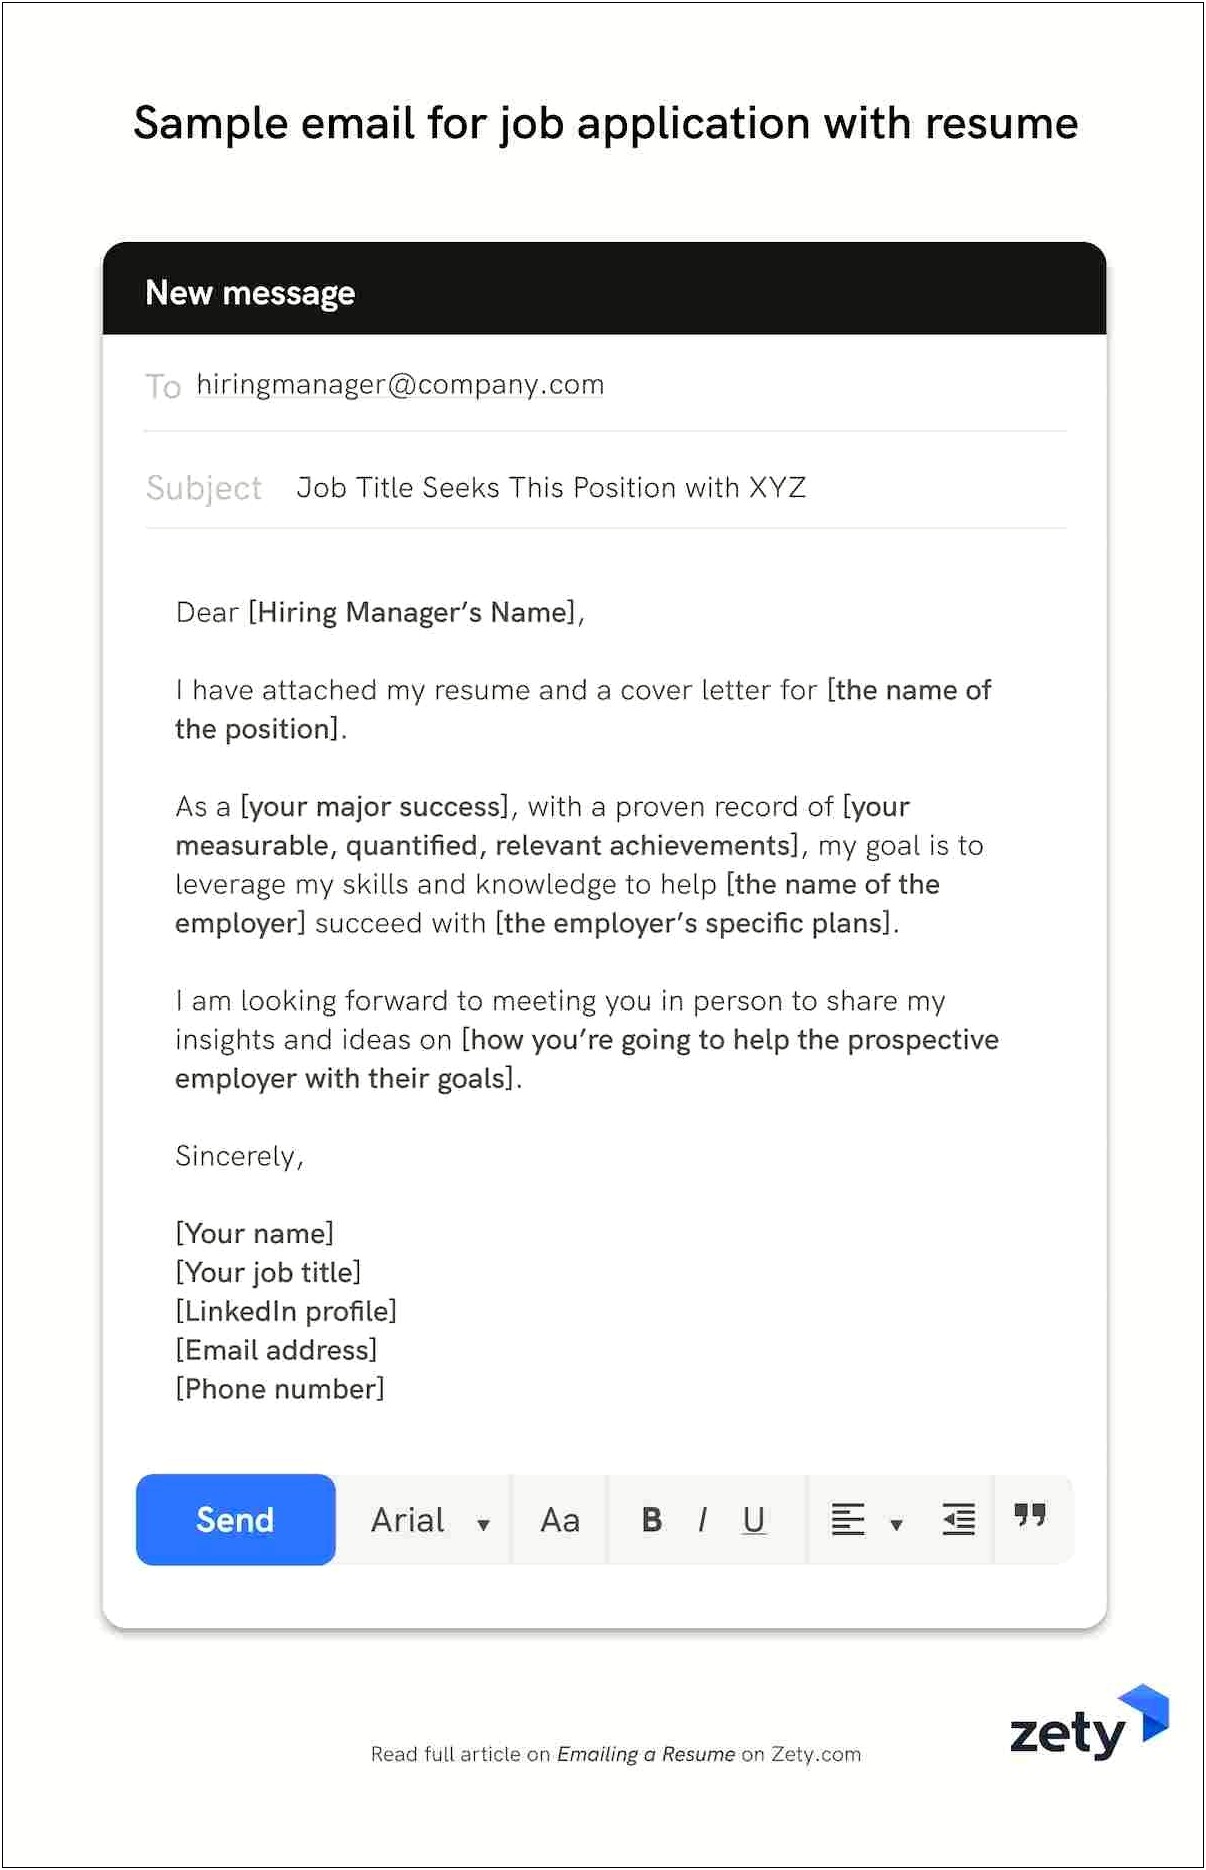 Resume Email Subject Line Examples